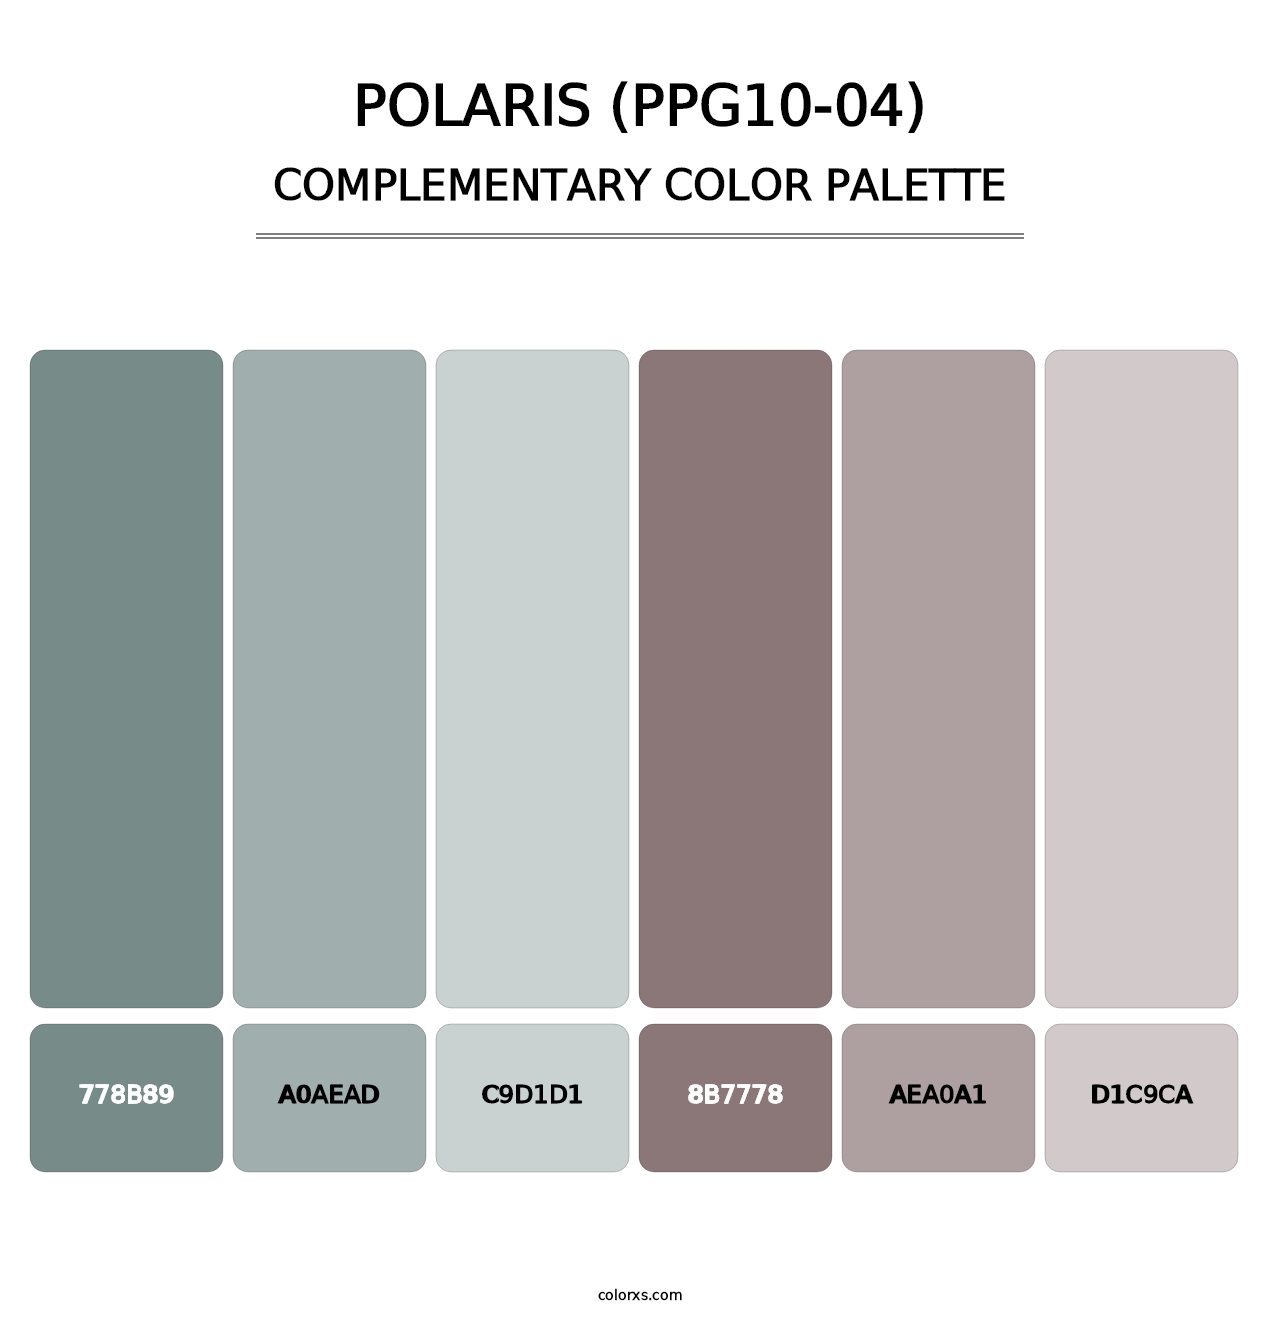 Polaris (PPG10-04) - Complementary Color Palette